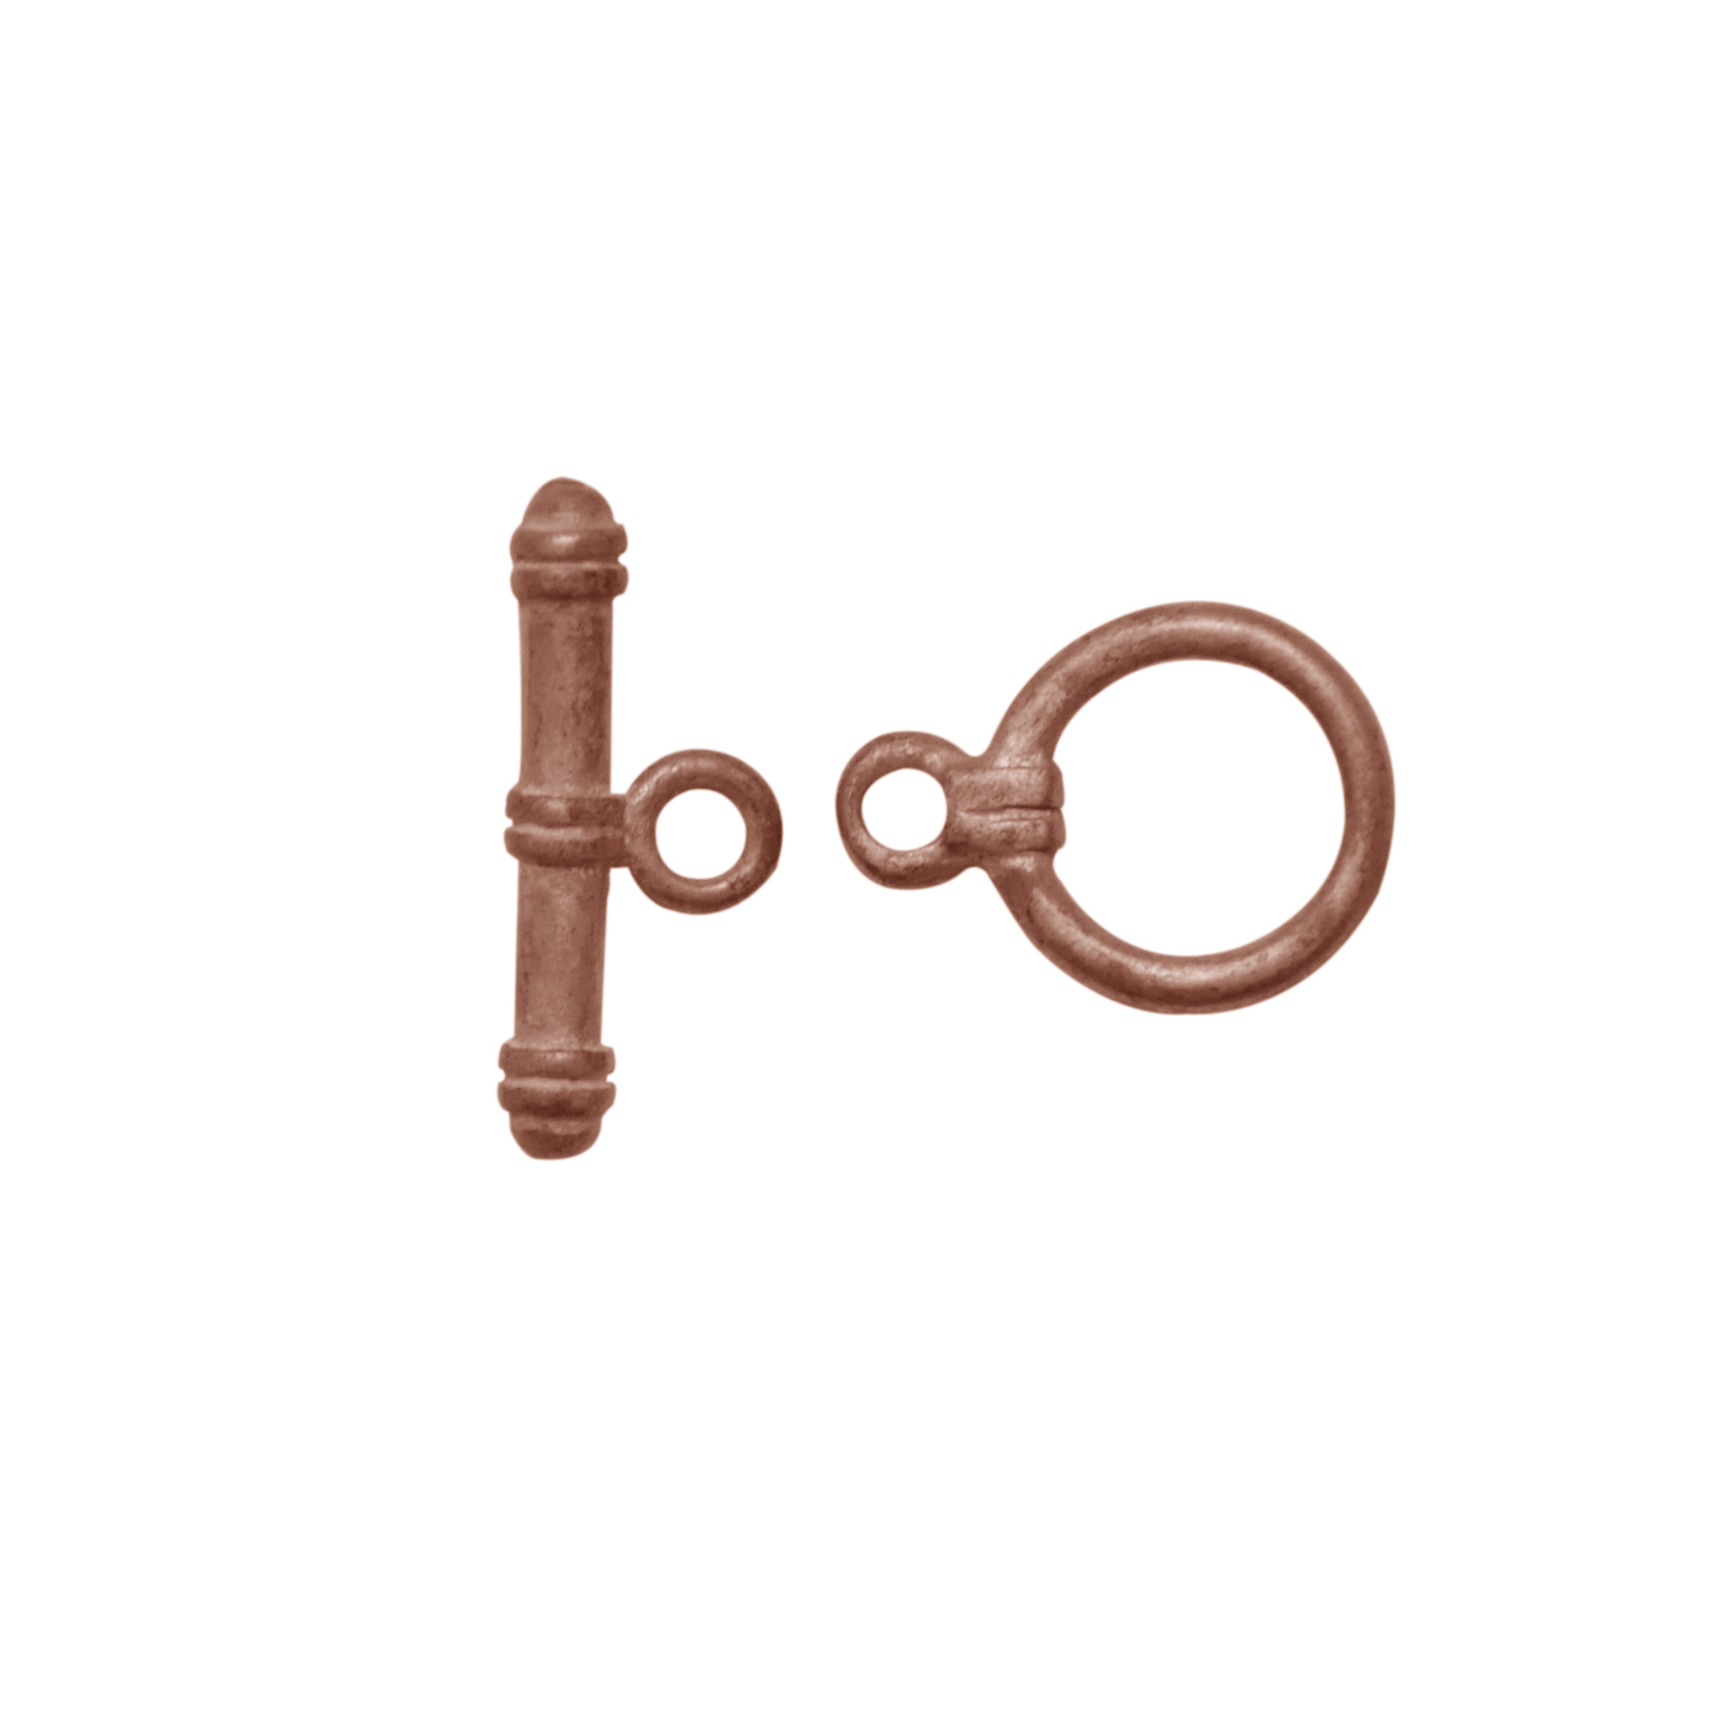 Findings > Plated (6 Finishes) > Antique Copper Plated > Clasps > Toggles